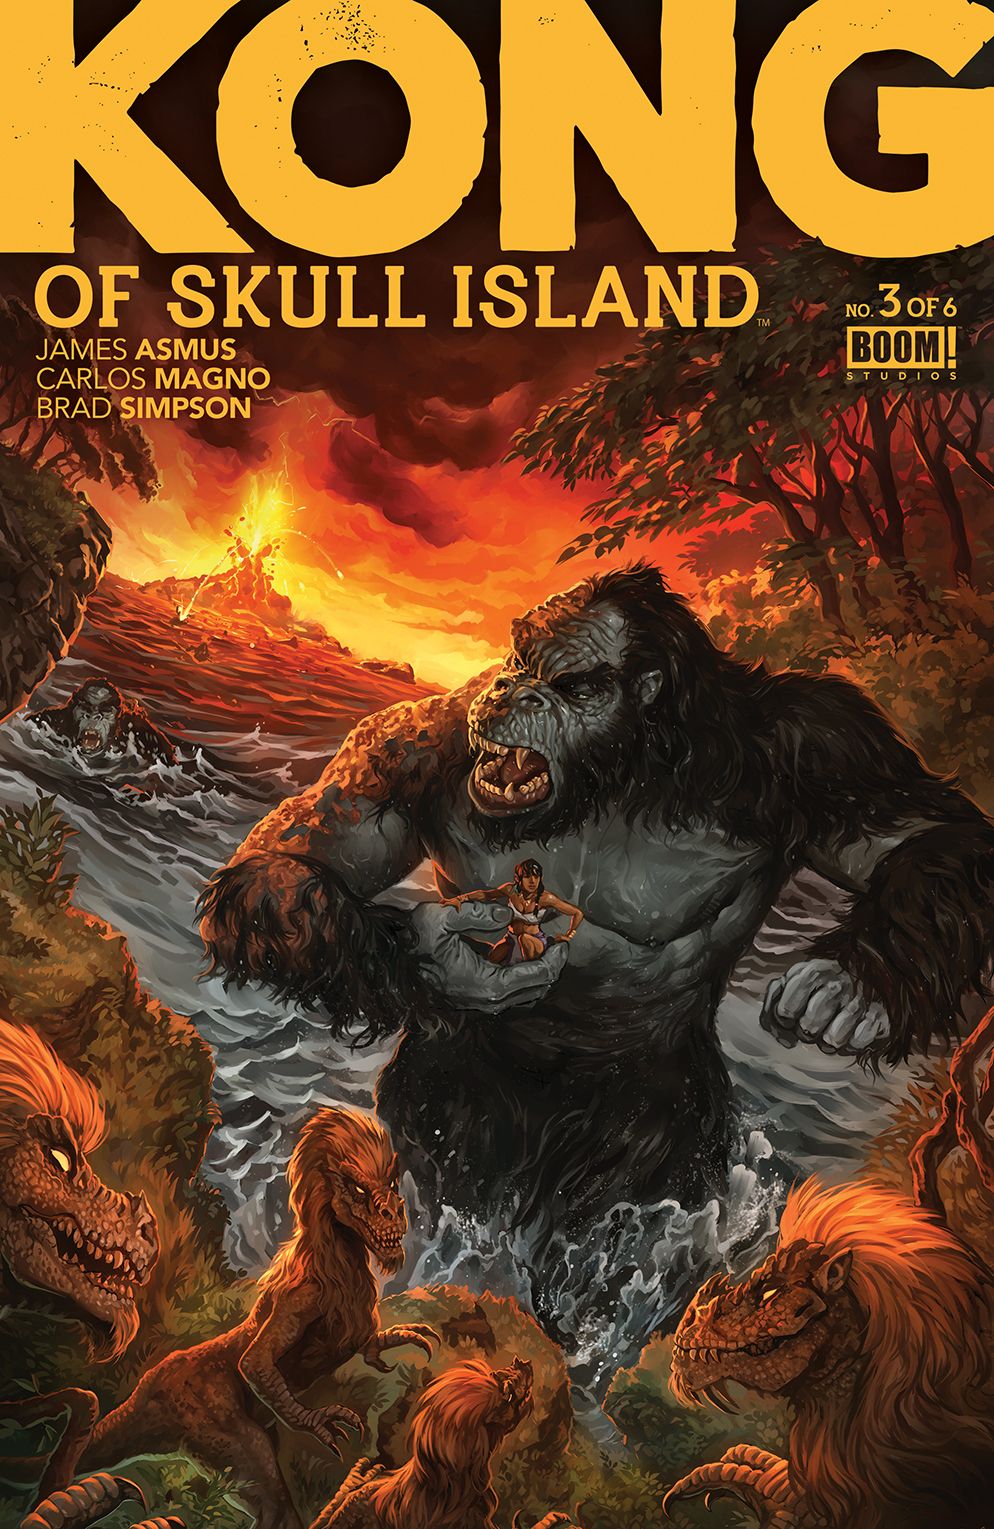 Kong of Skull Island #3 cover by Nick Robles.